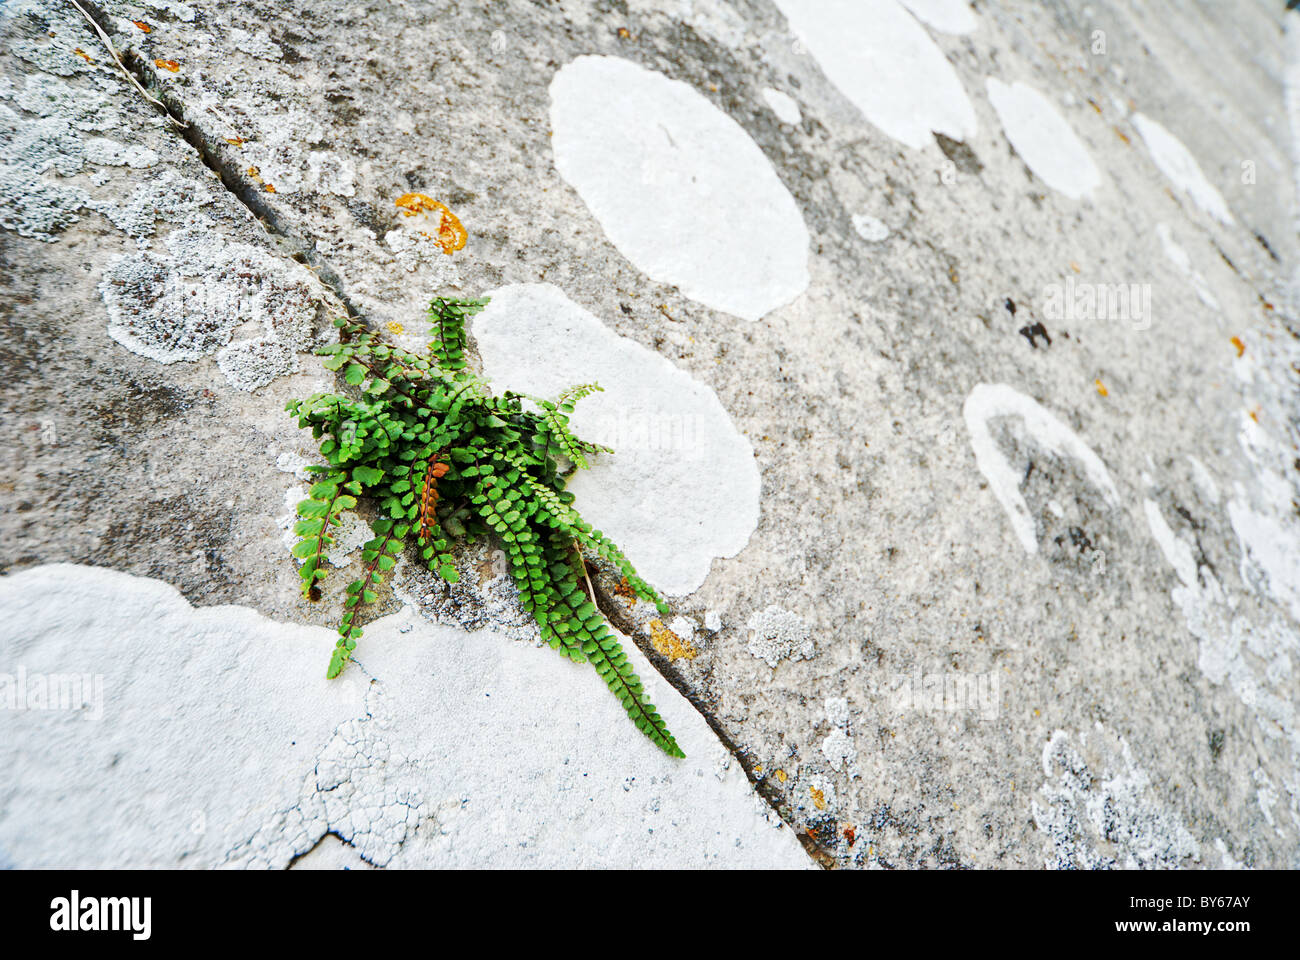 Bright green fern growing on old stone wall Stock Photo